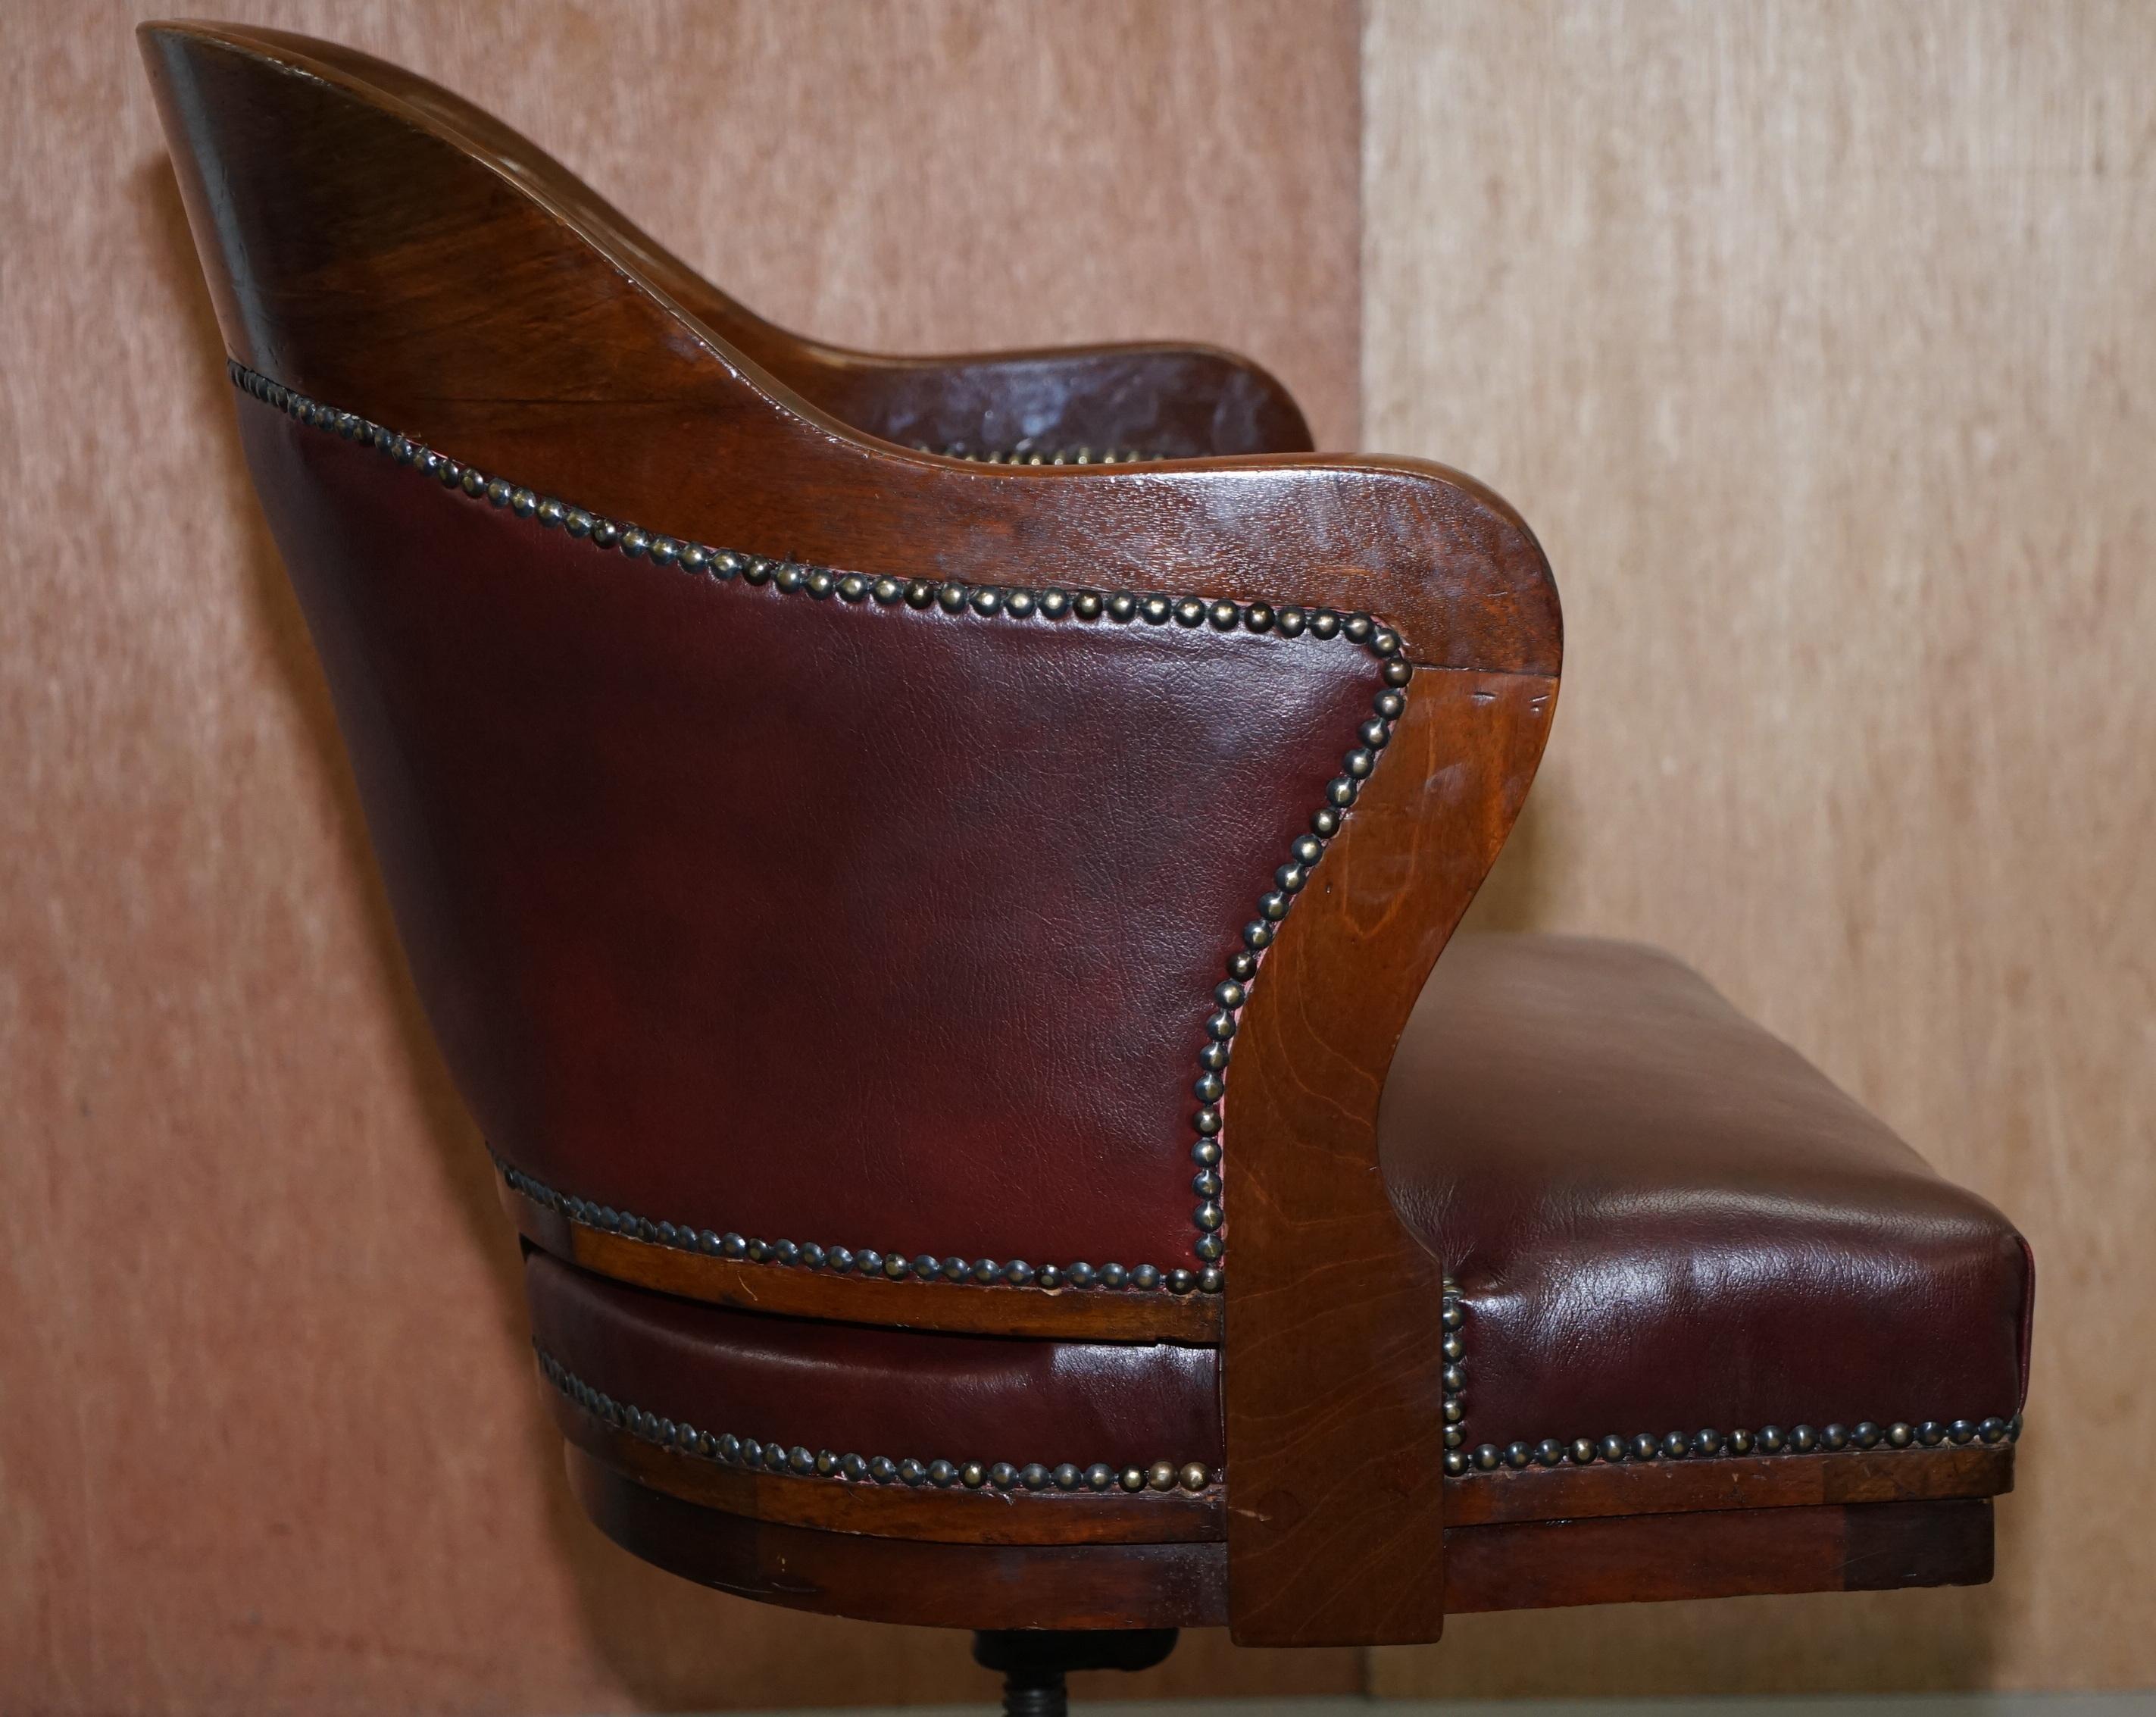 1900 Wylie & Lochhead by Appointment to the King Oxblood Leather Captains Chair 5